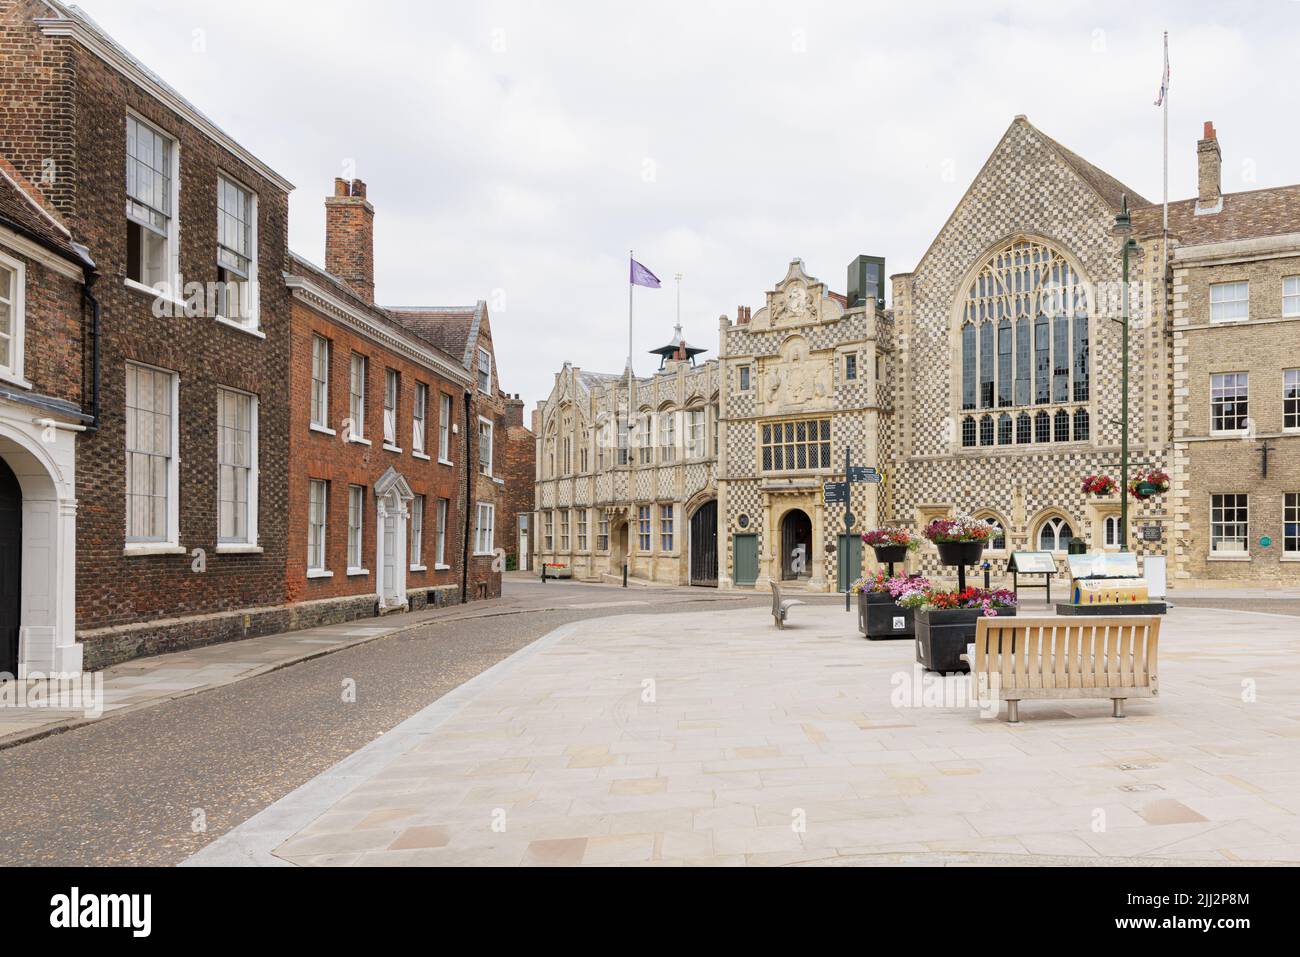 King's Lynn, Norfolk, UK, July 20th 2022: The Grade I listed Trinity Guildhall and the Town Hall, both with striking chequered patterned exteriors. Stock Photo